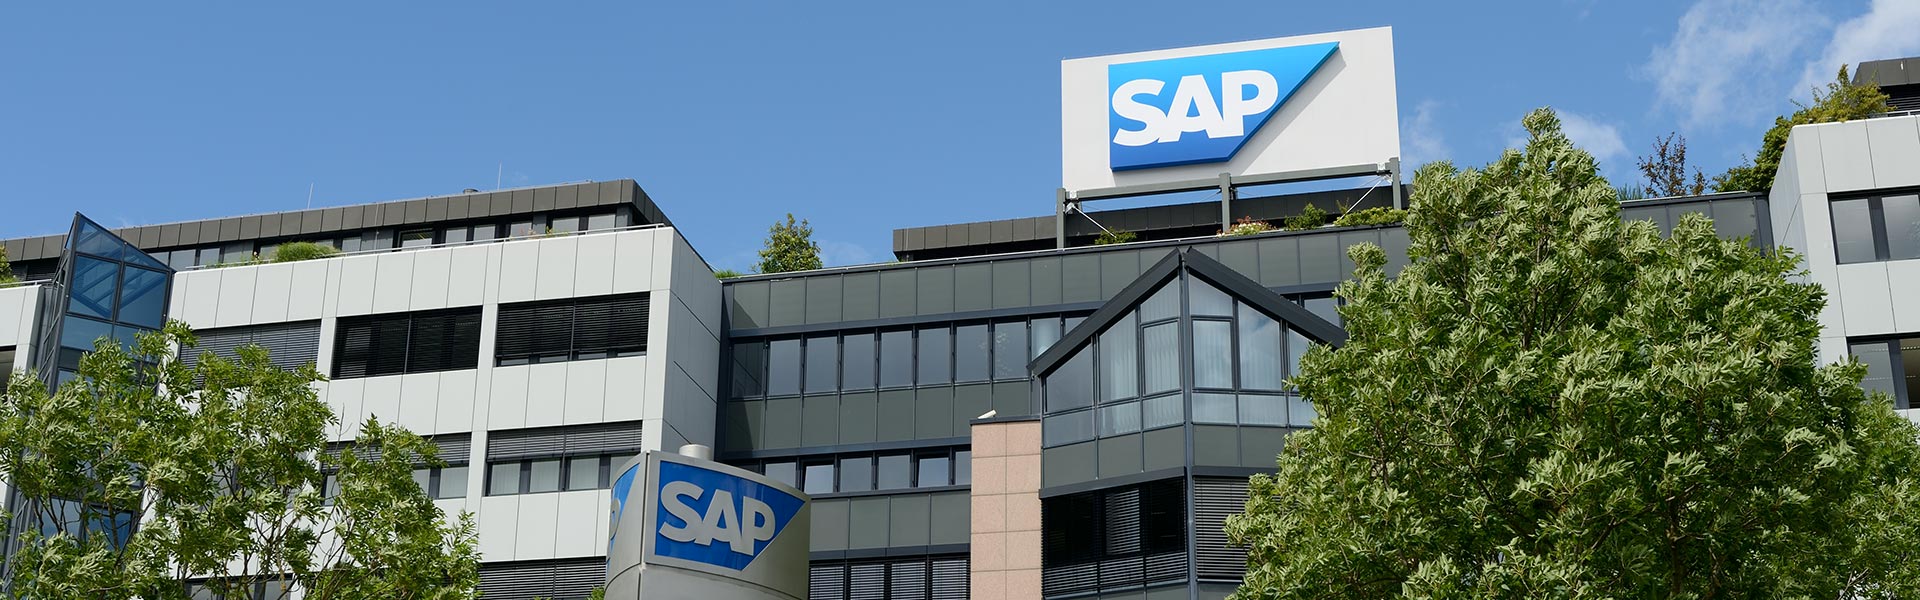 ATB Financial Sends One of the World’s First Real-Time Payments From Canada to Germany Using Blockchain Technology Supported by SAP